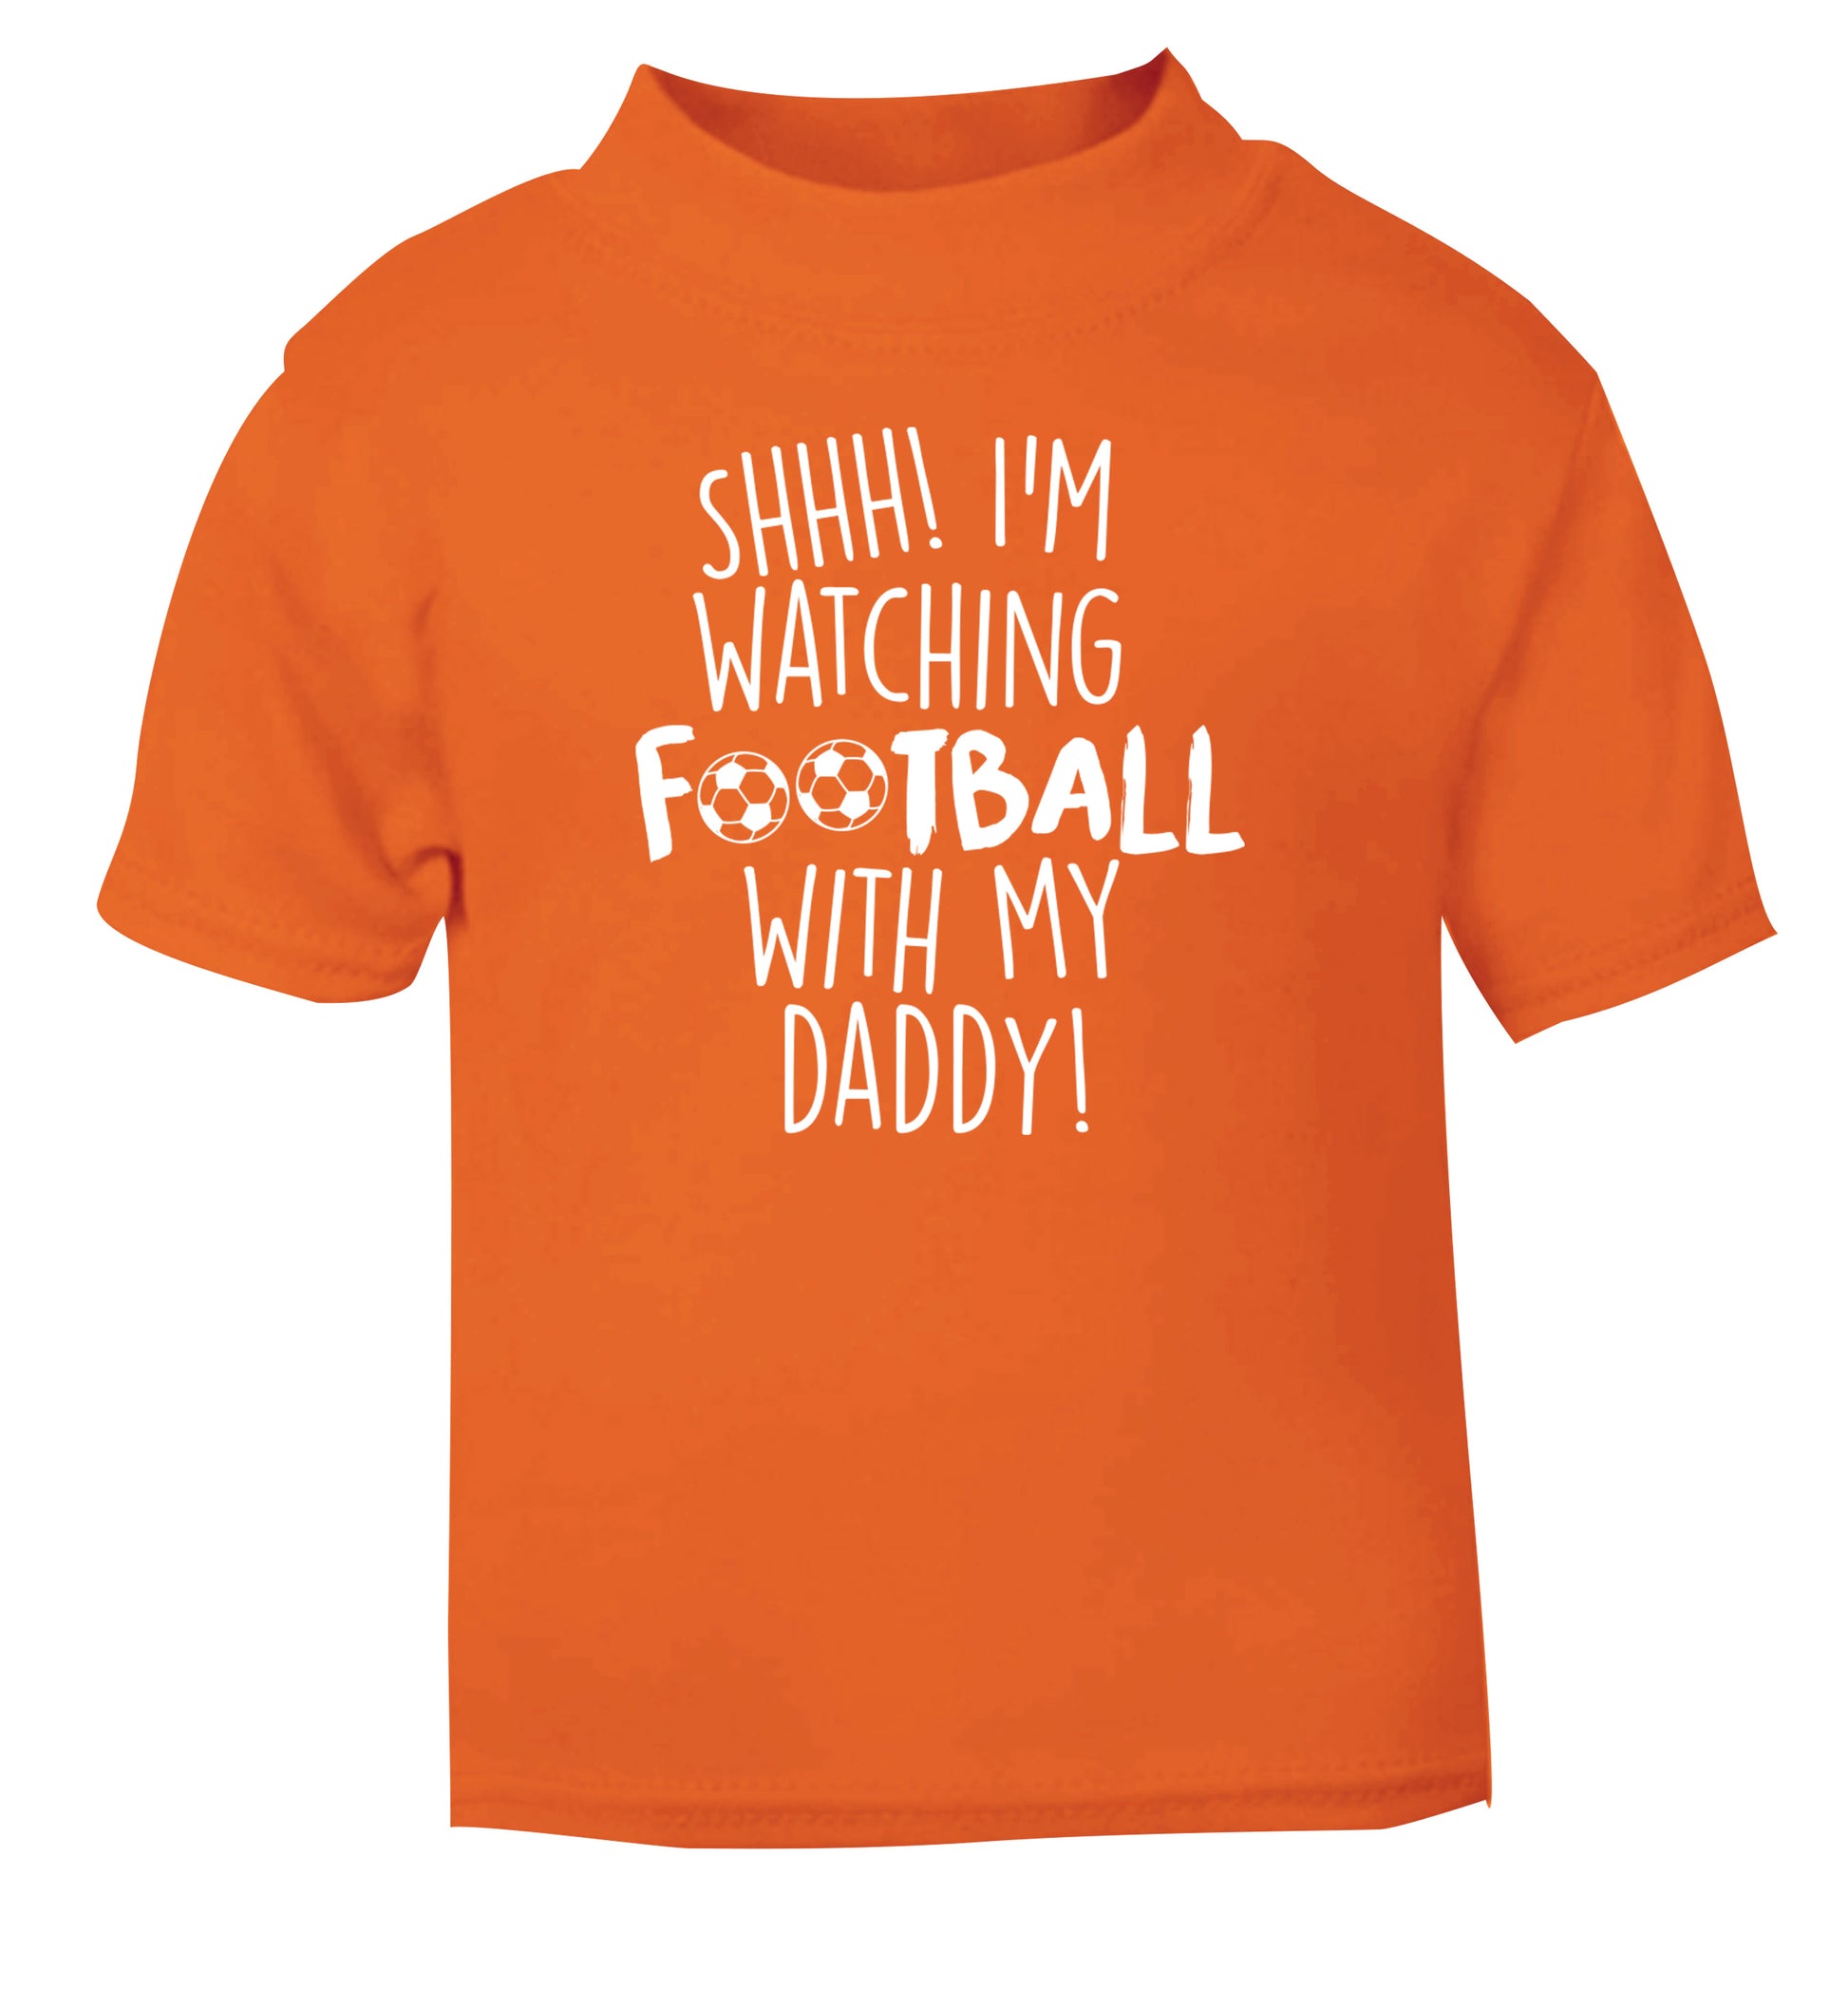 Shhh I'm watching football with my daddy orange Baby Toddler Tshirt 2 Years